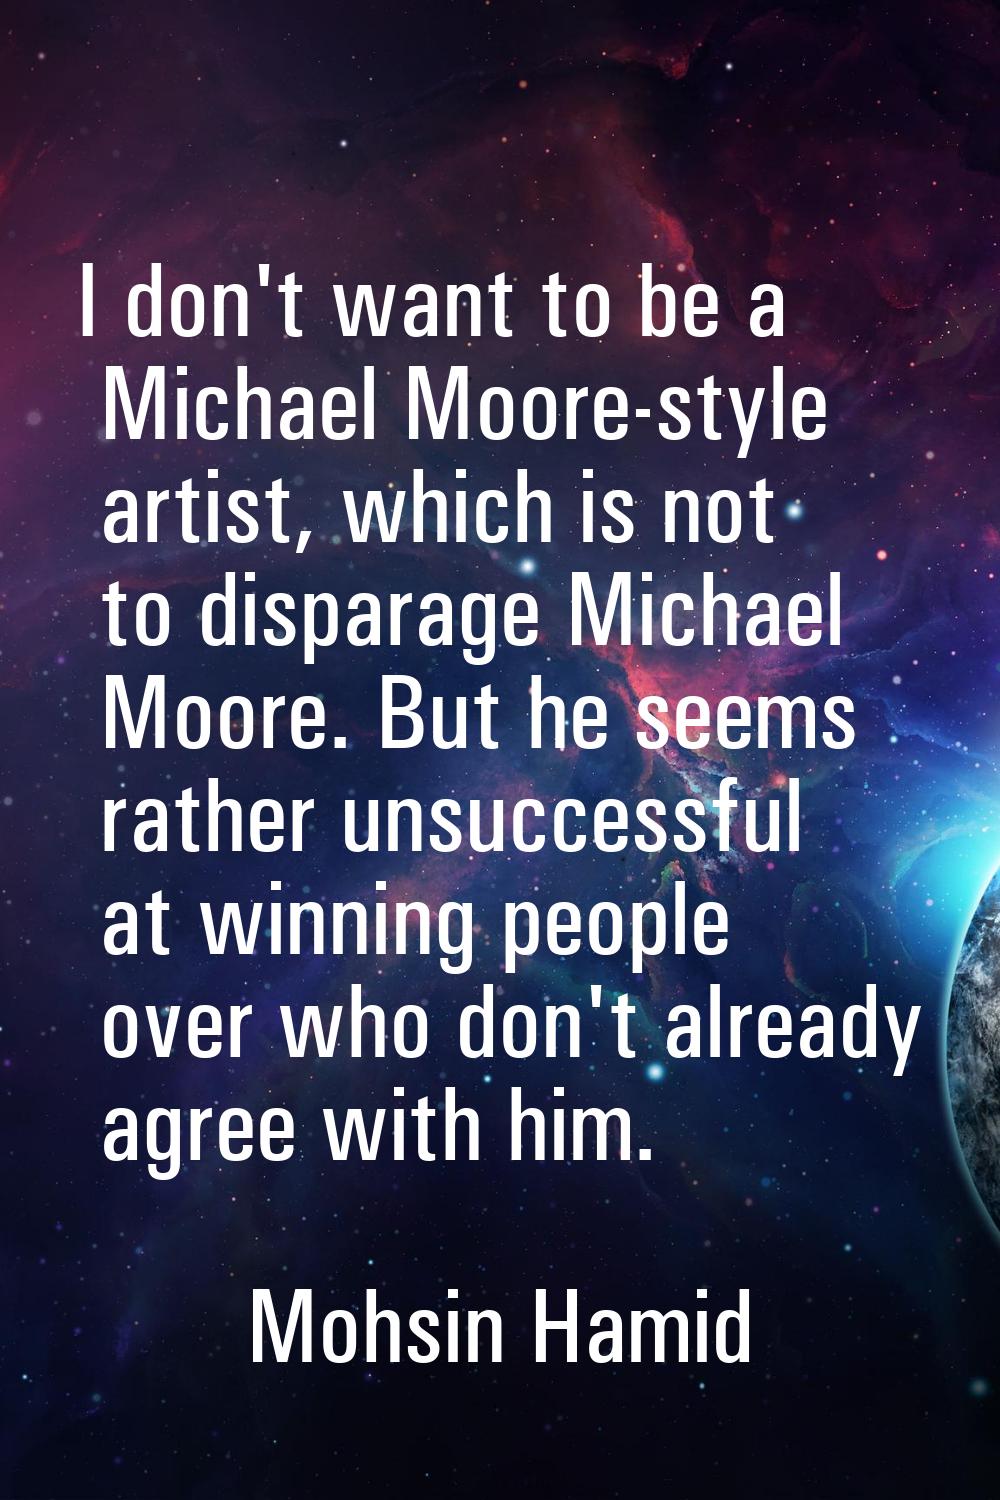 I don't want to be a Michael Moore-style artist, which is not to disparage Michael Moore. But he se